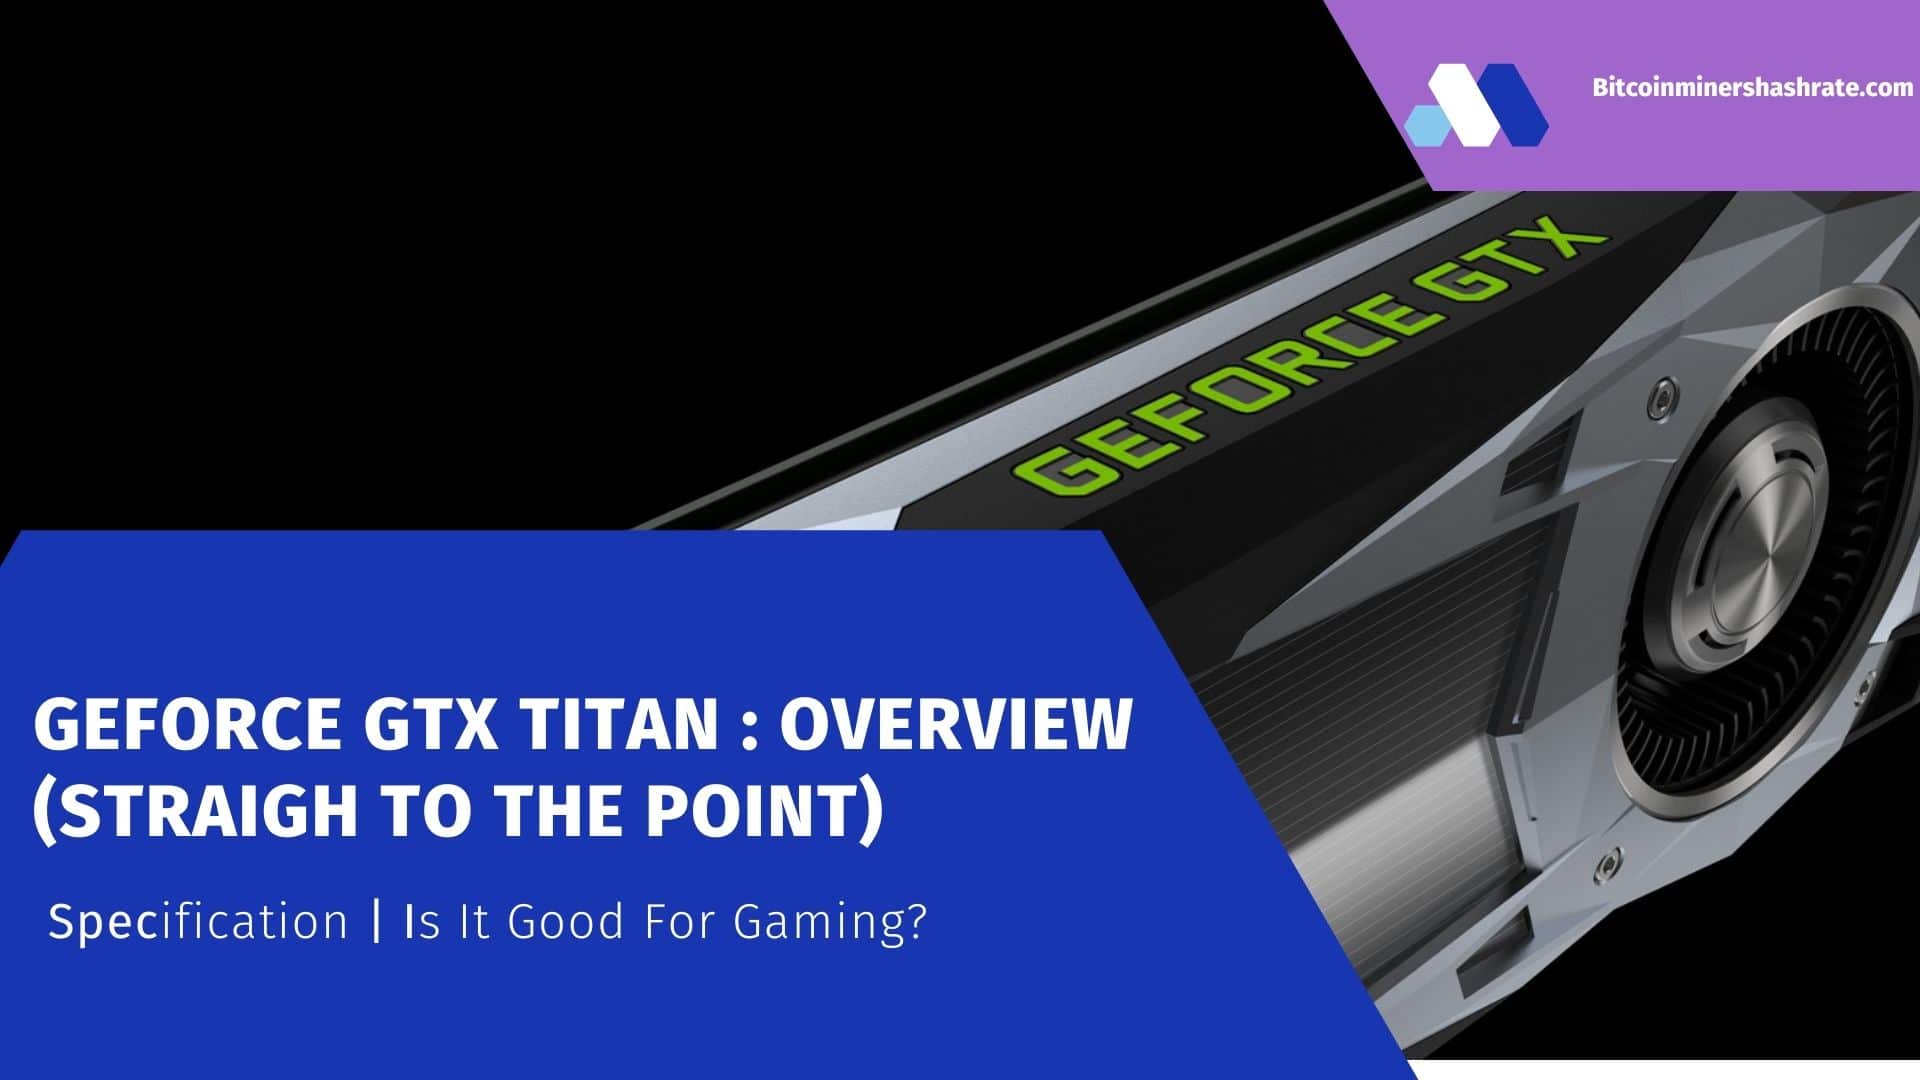 GeForce GTX TITAN X - Is it Good for Gaming